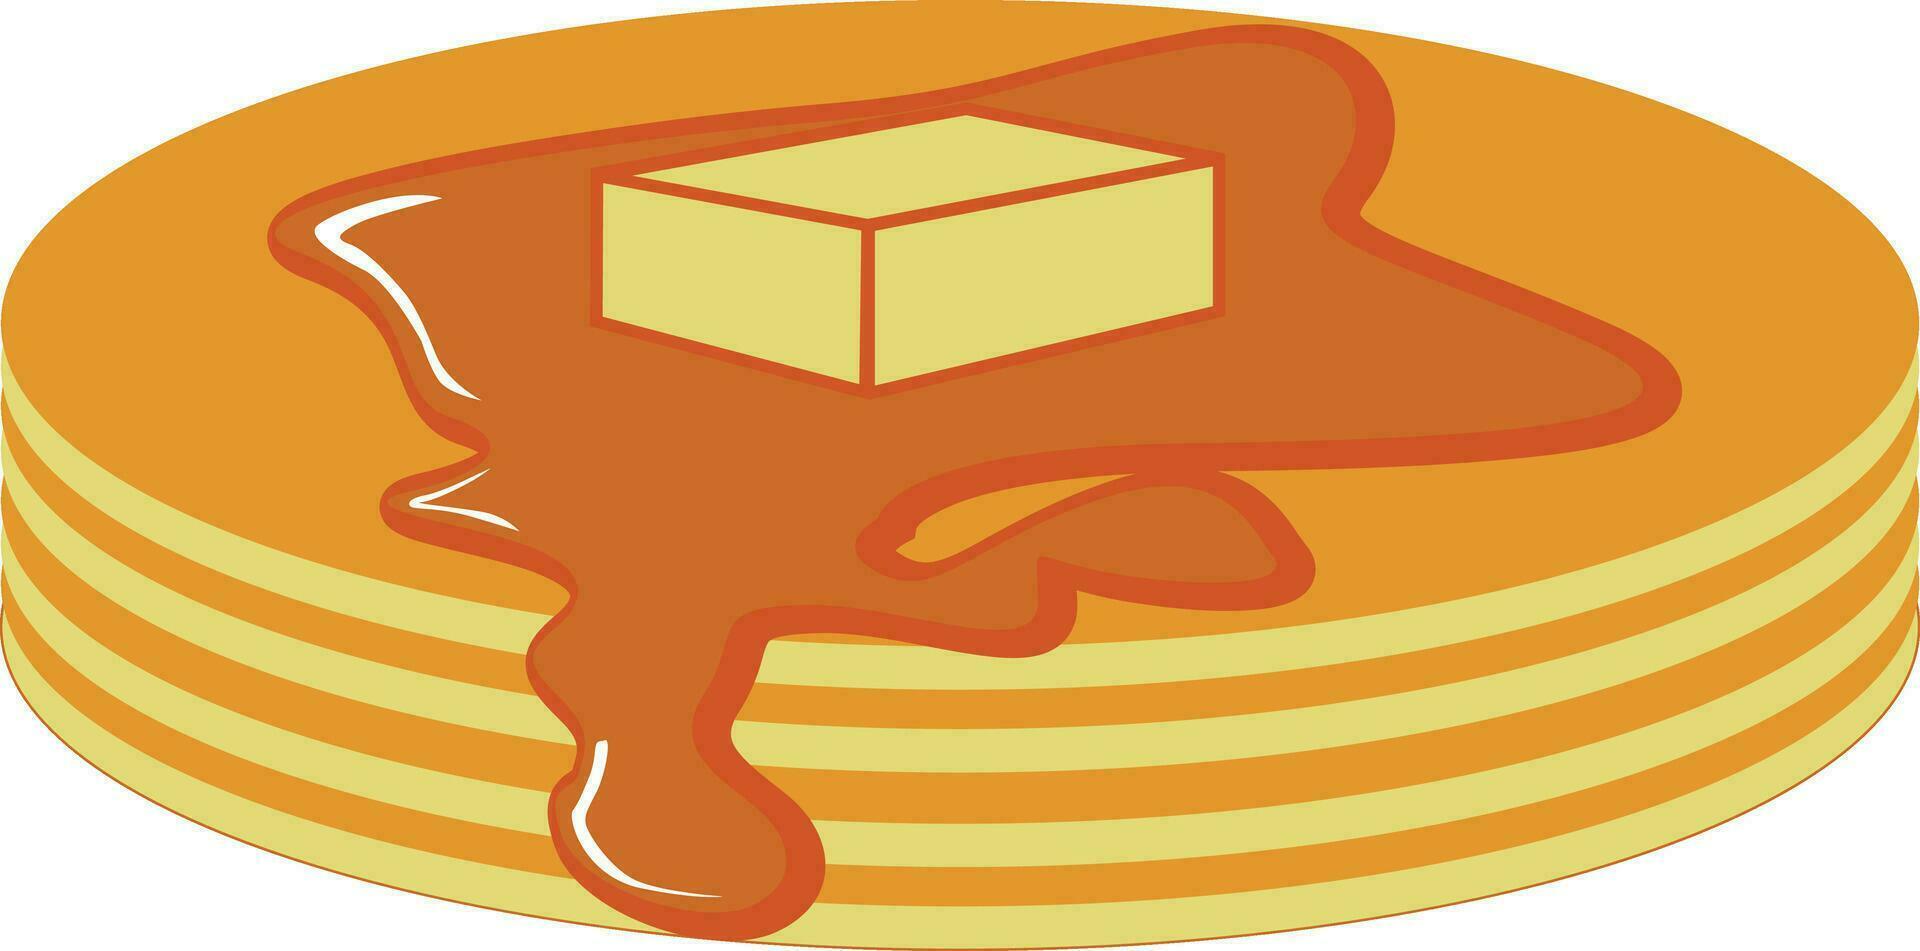 Pancake day  vector icon free download